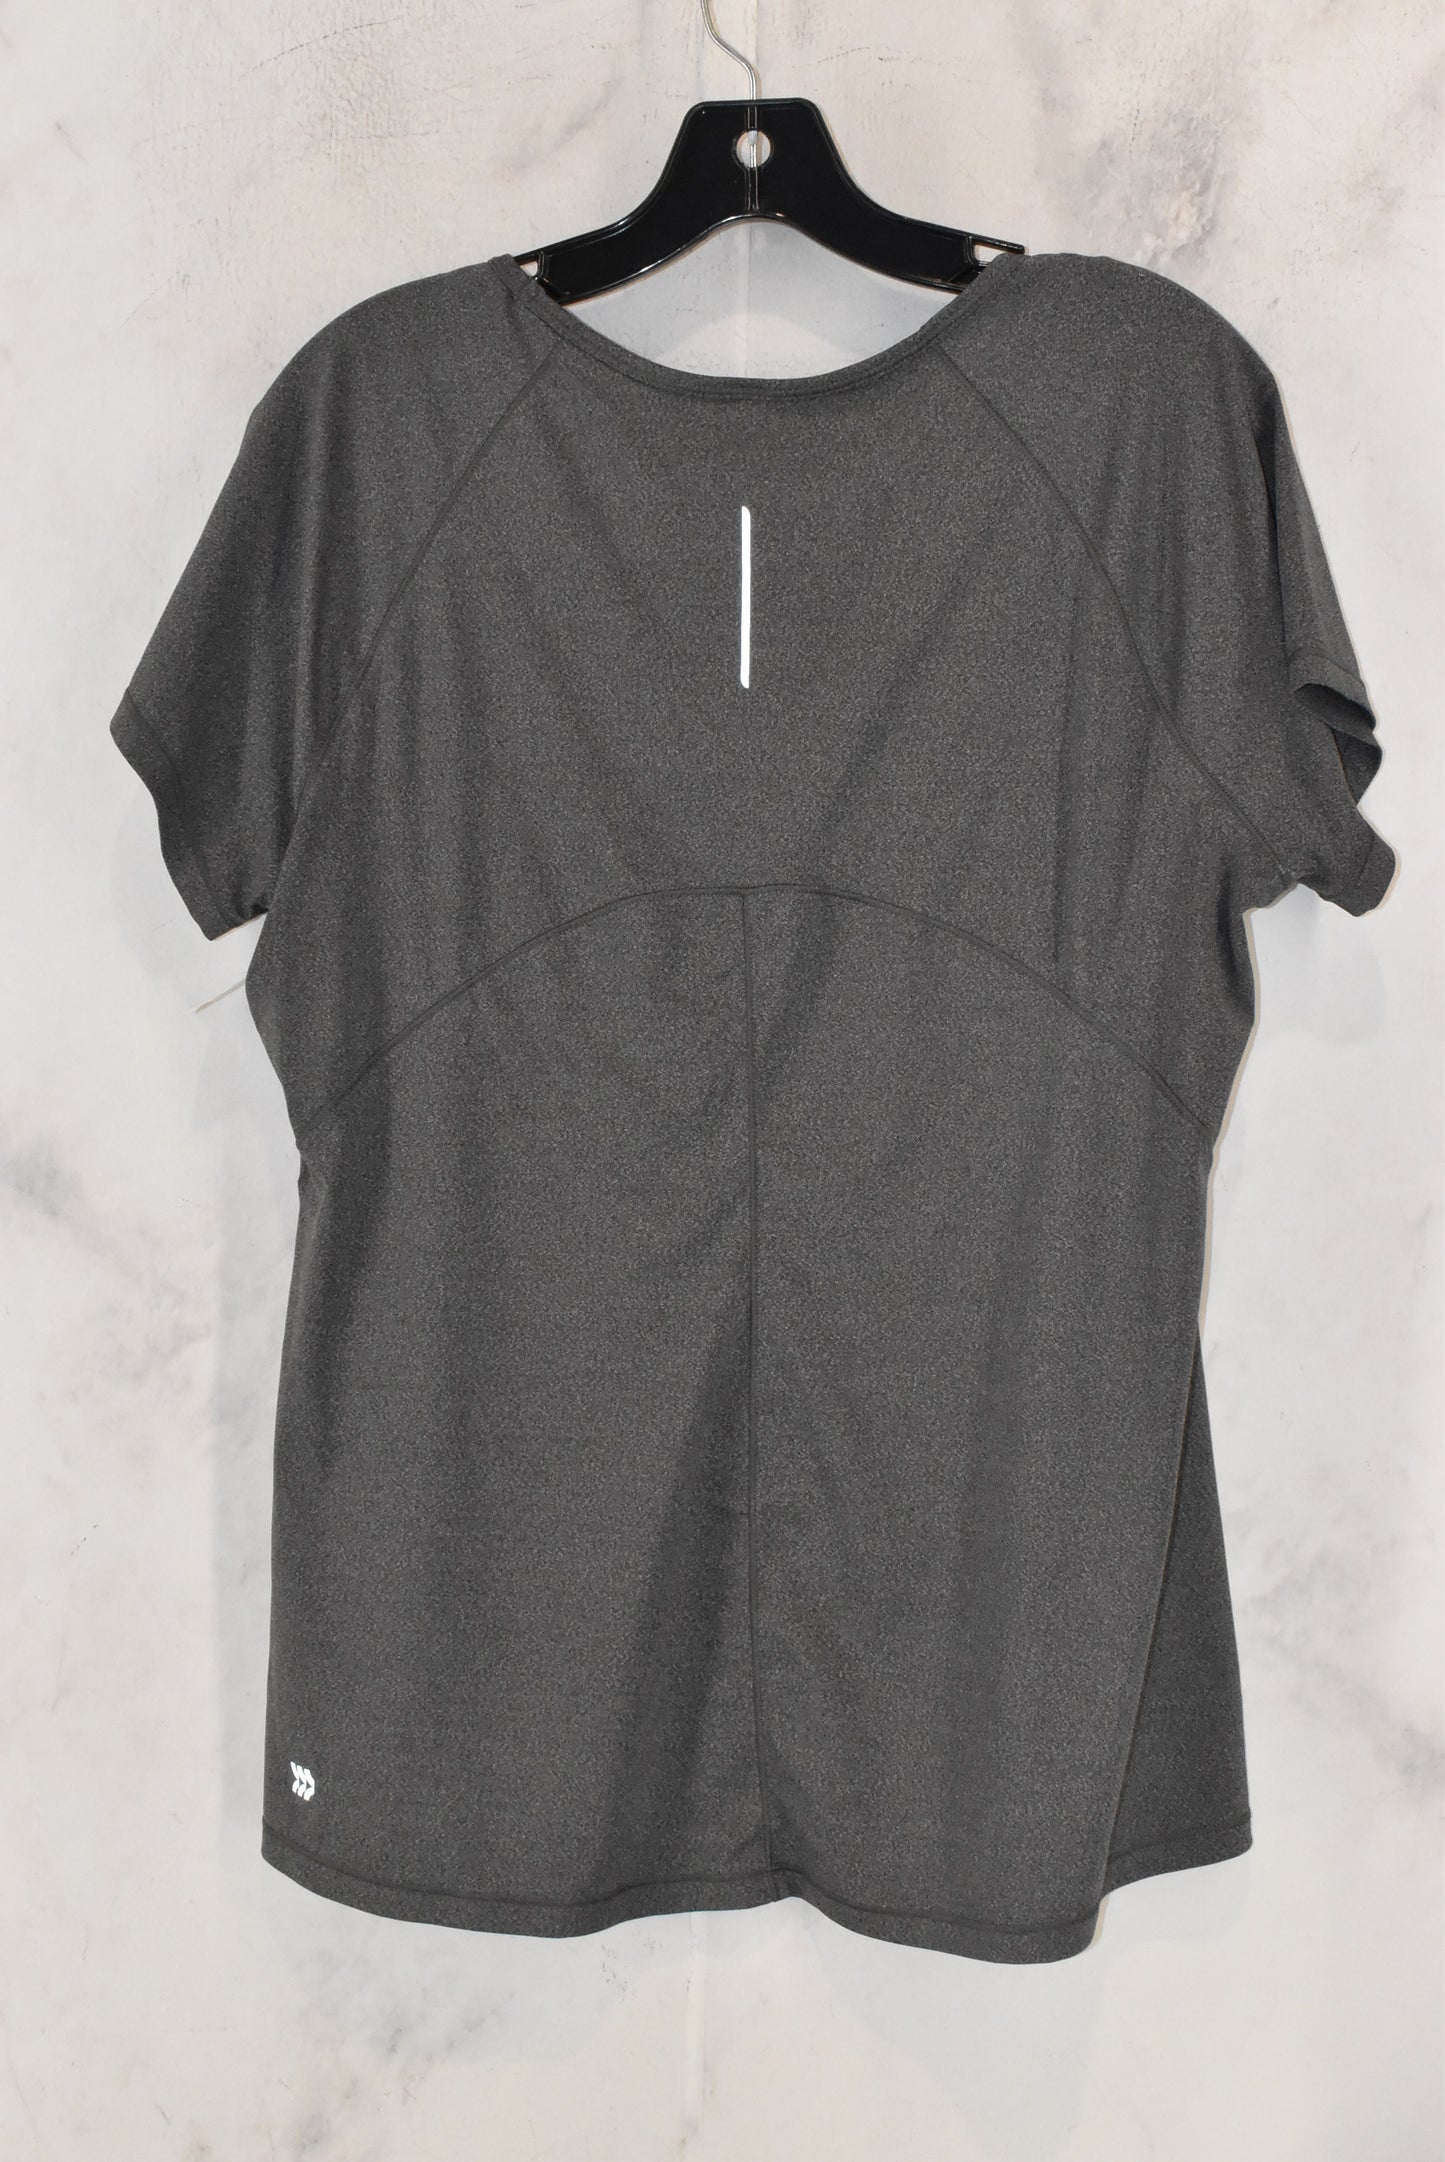 Athletic Top Short Sleeve By All In Motion  Size: L